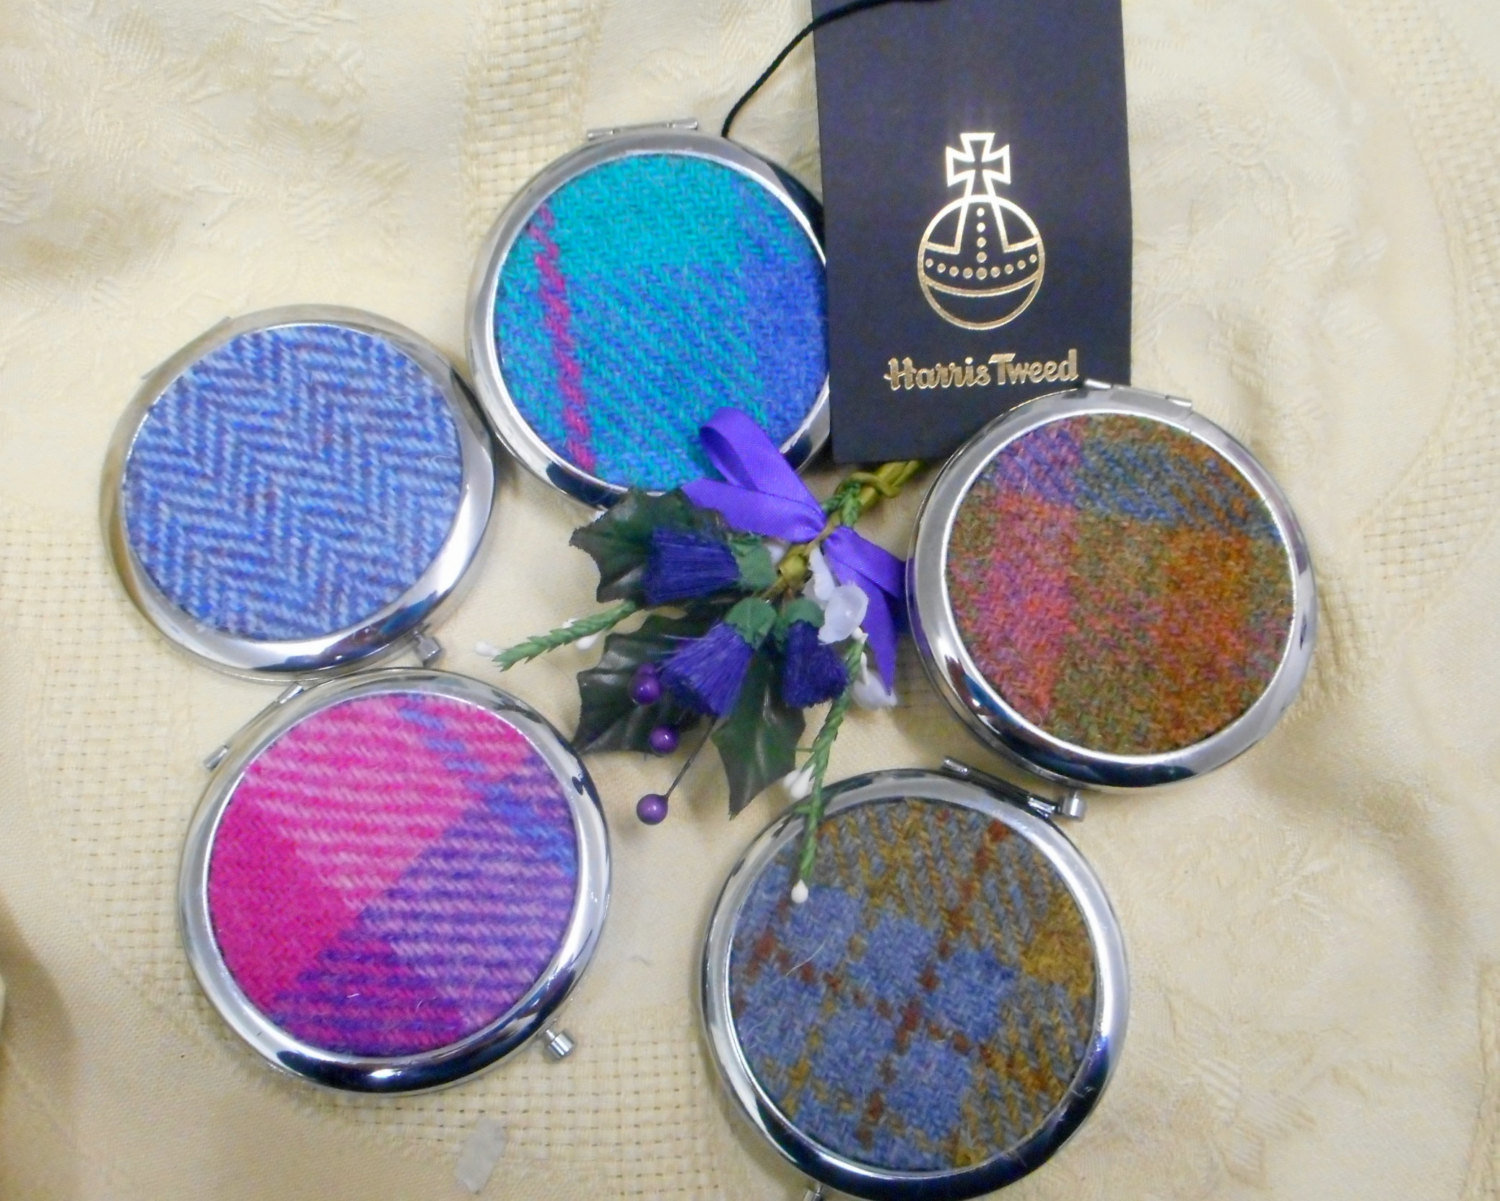 Mirror compact Jade Green and blue Harris Tweed,  womens gift, handbag accessory, for Mother, sister, best friend, silver round made in Scotland UK